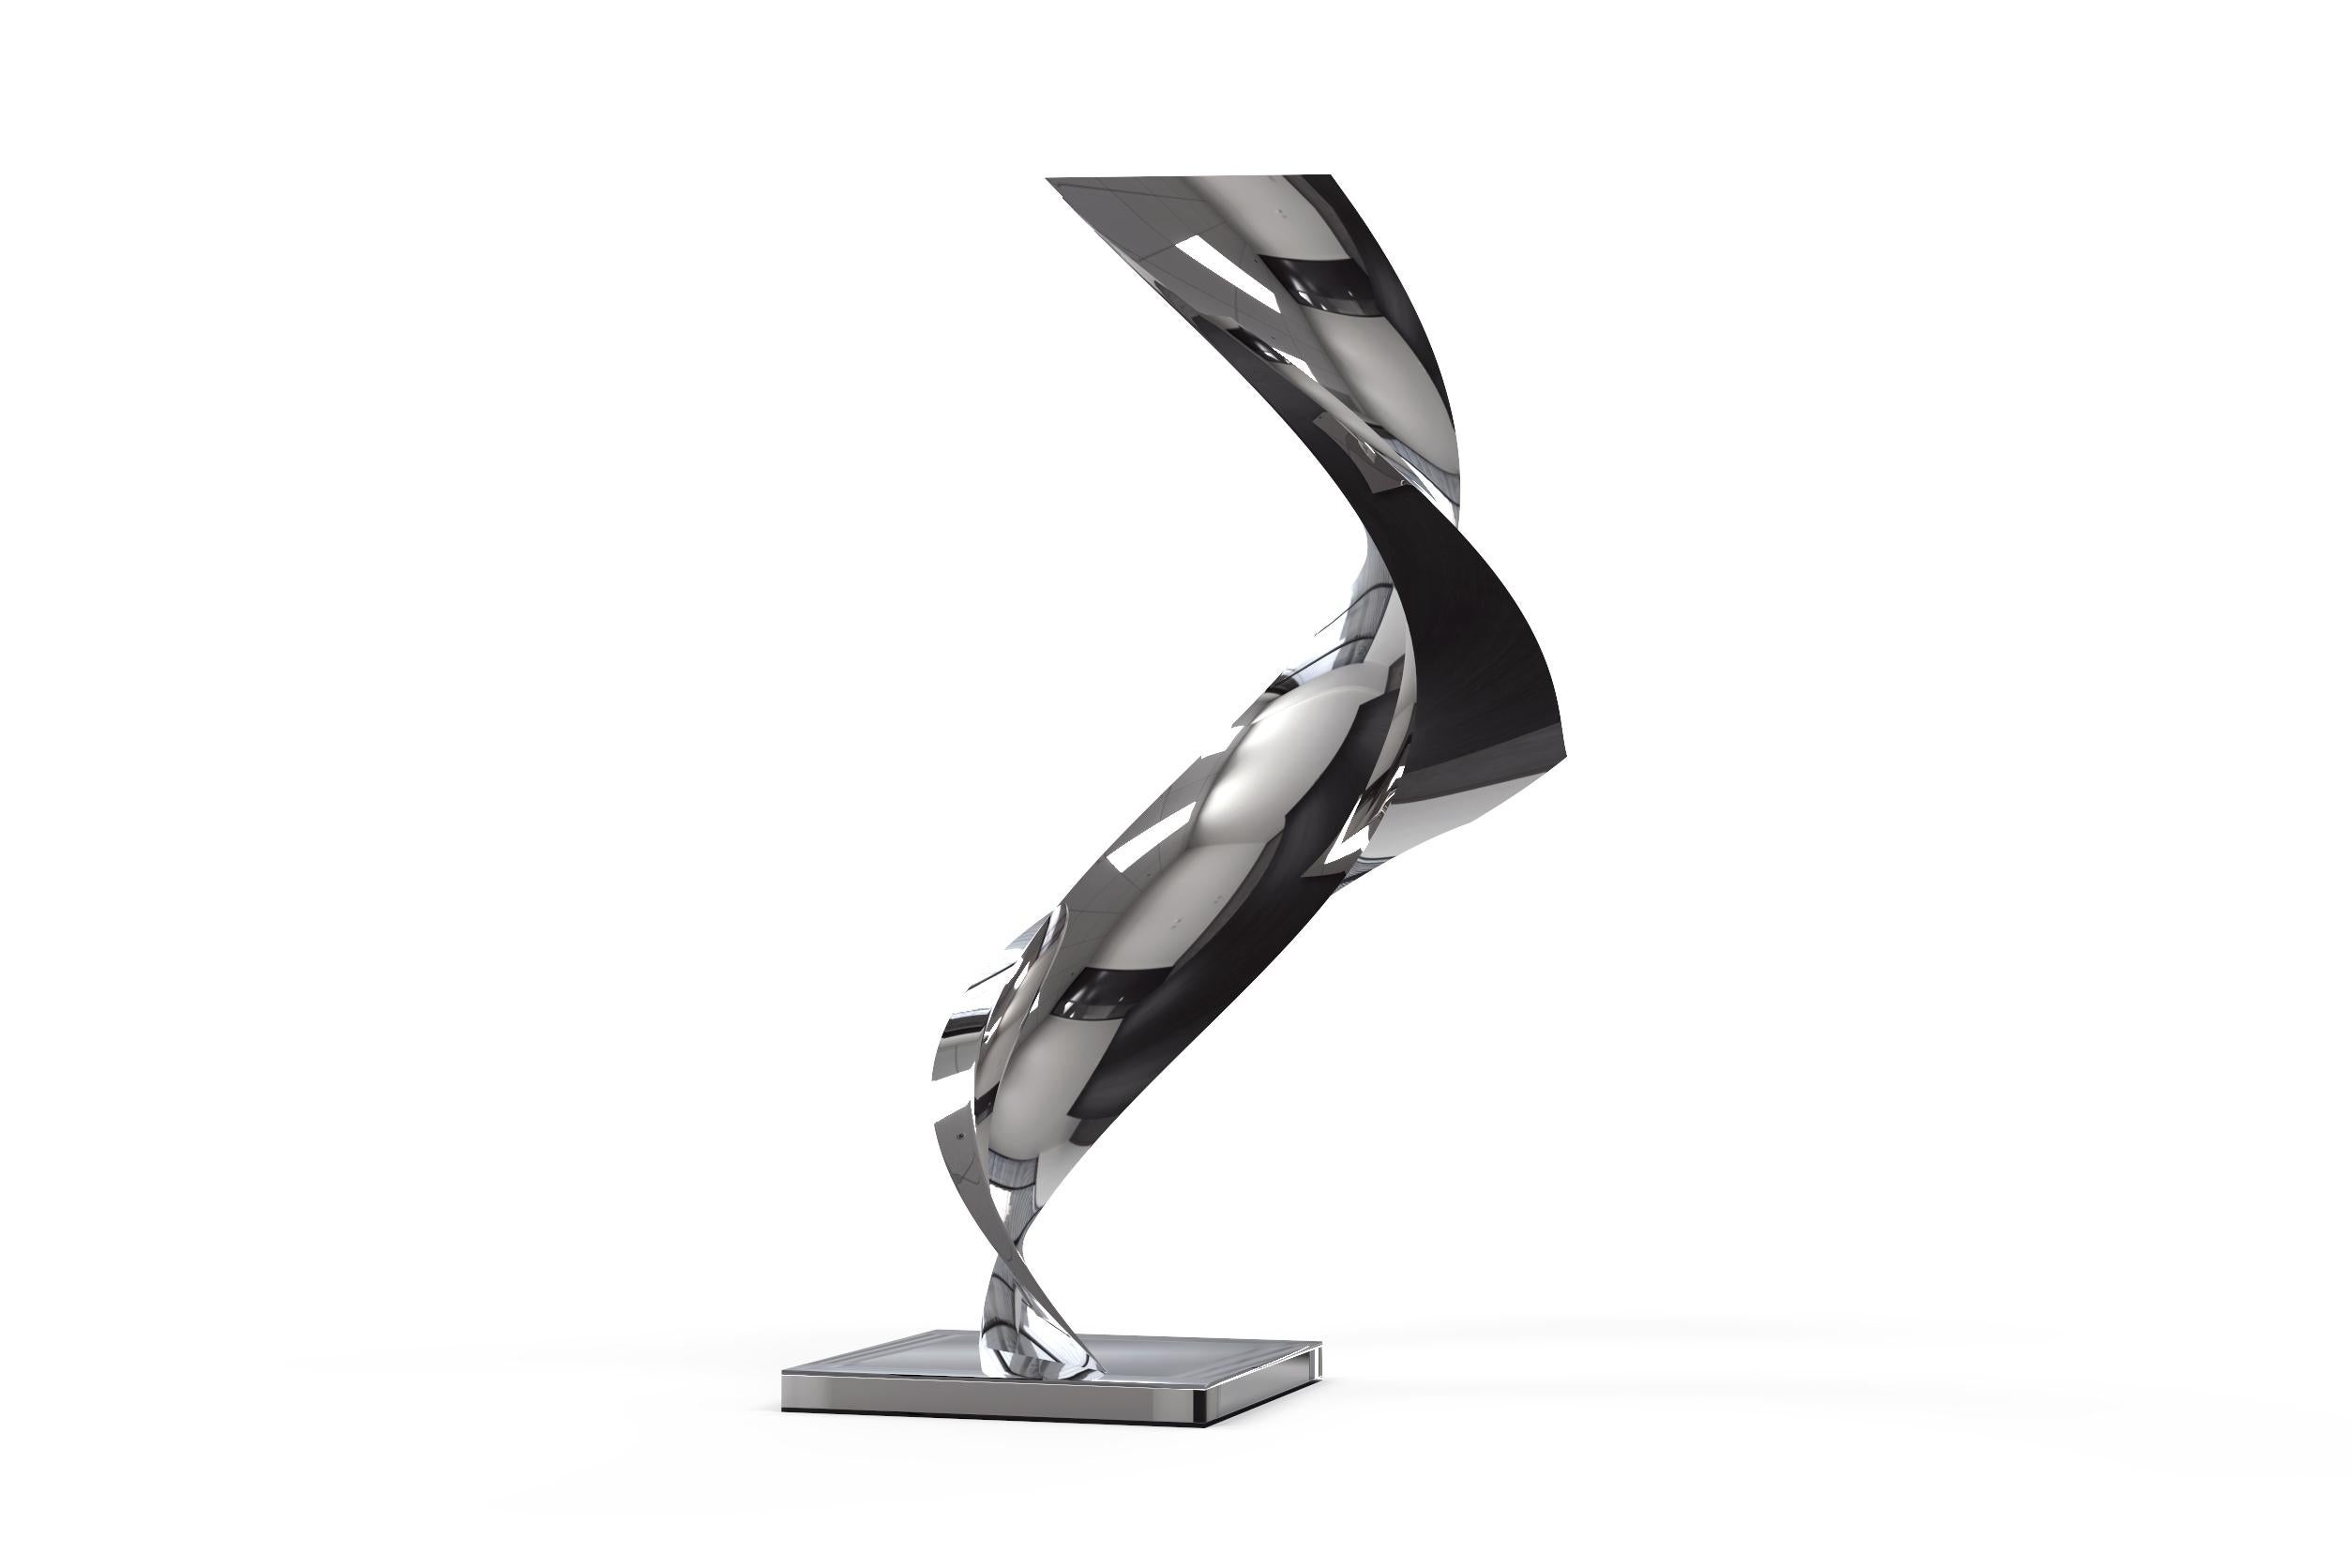 Cubus Spiralis Polished Stainless Steel Abstract Minimalist Sculpture For Sale 1